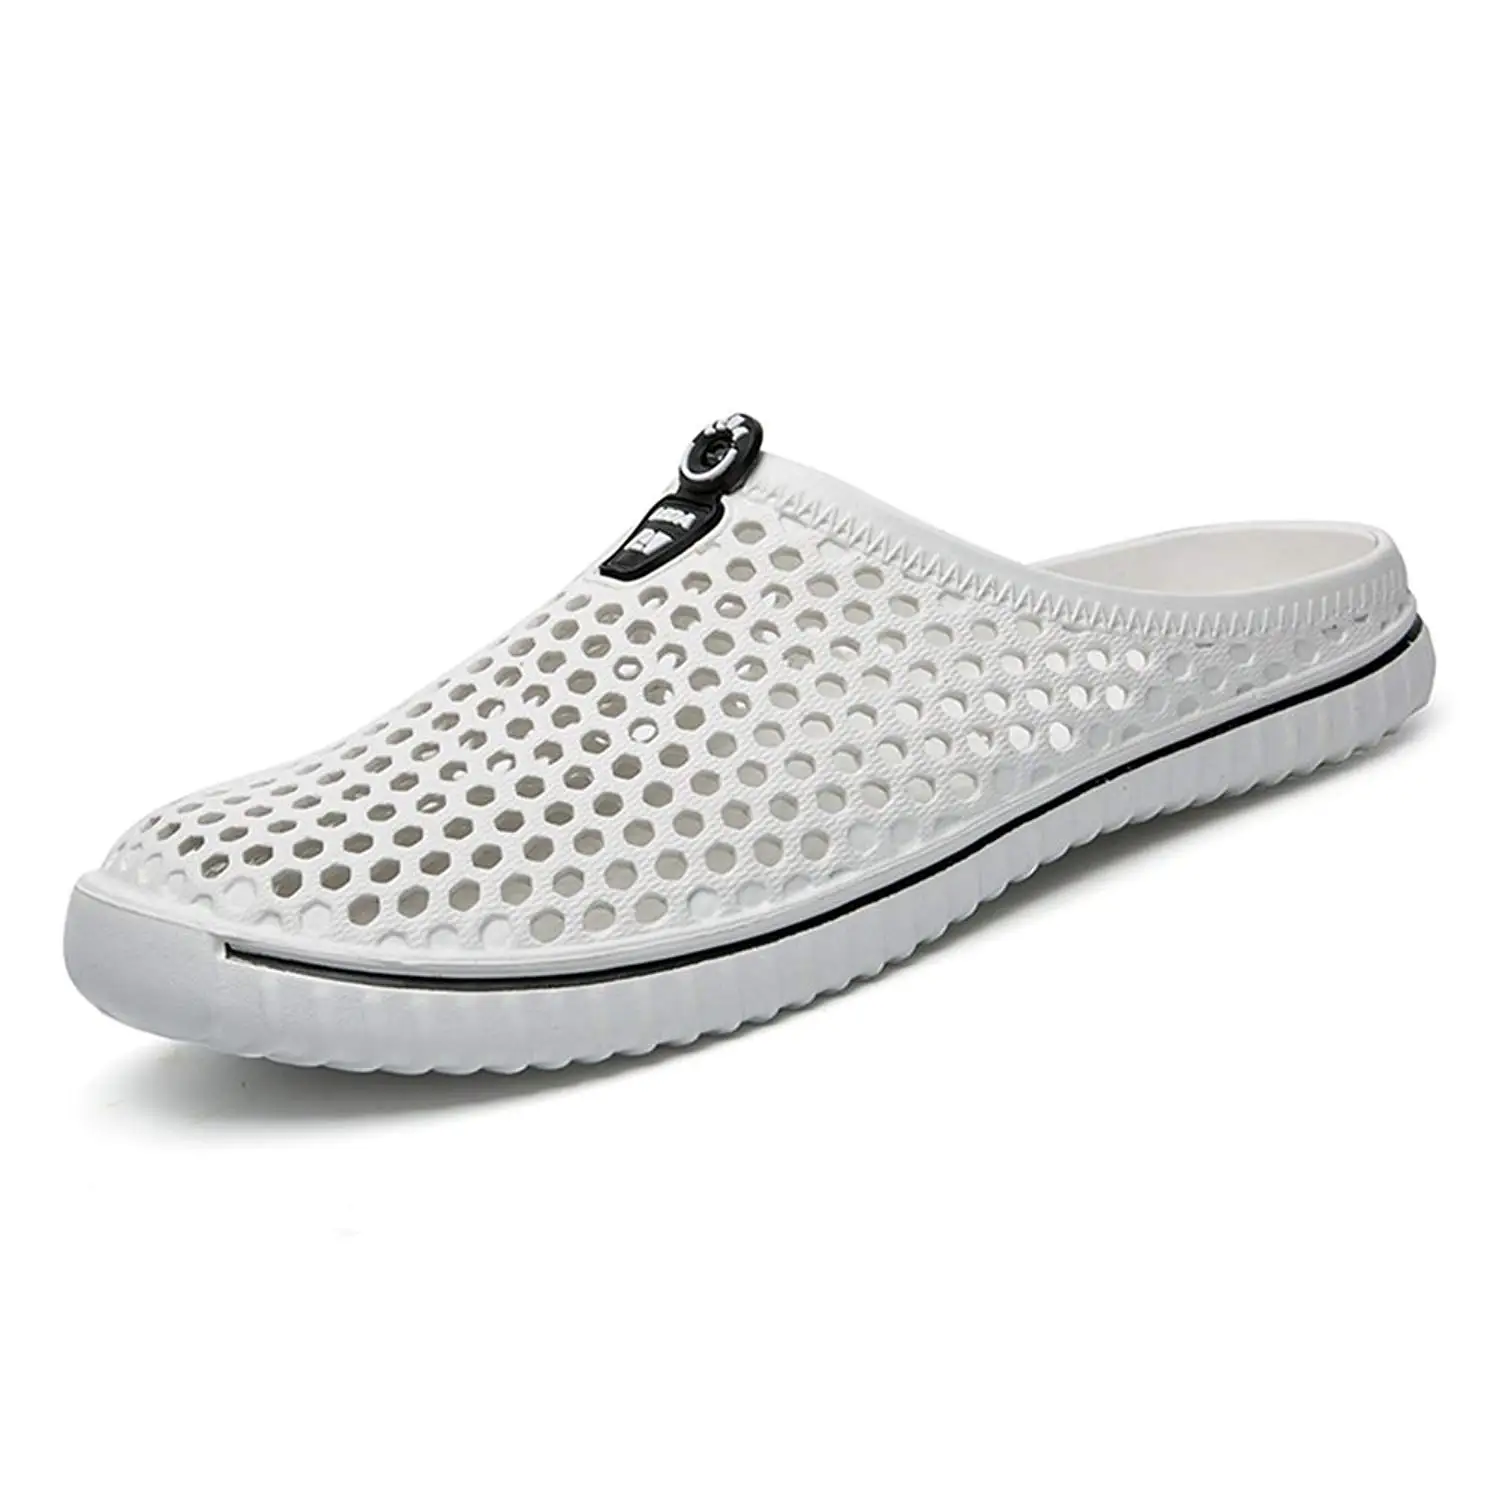 Cheap Water Slippers, find Water Slippers deals on line at Alibaba.com